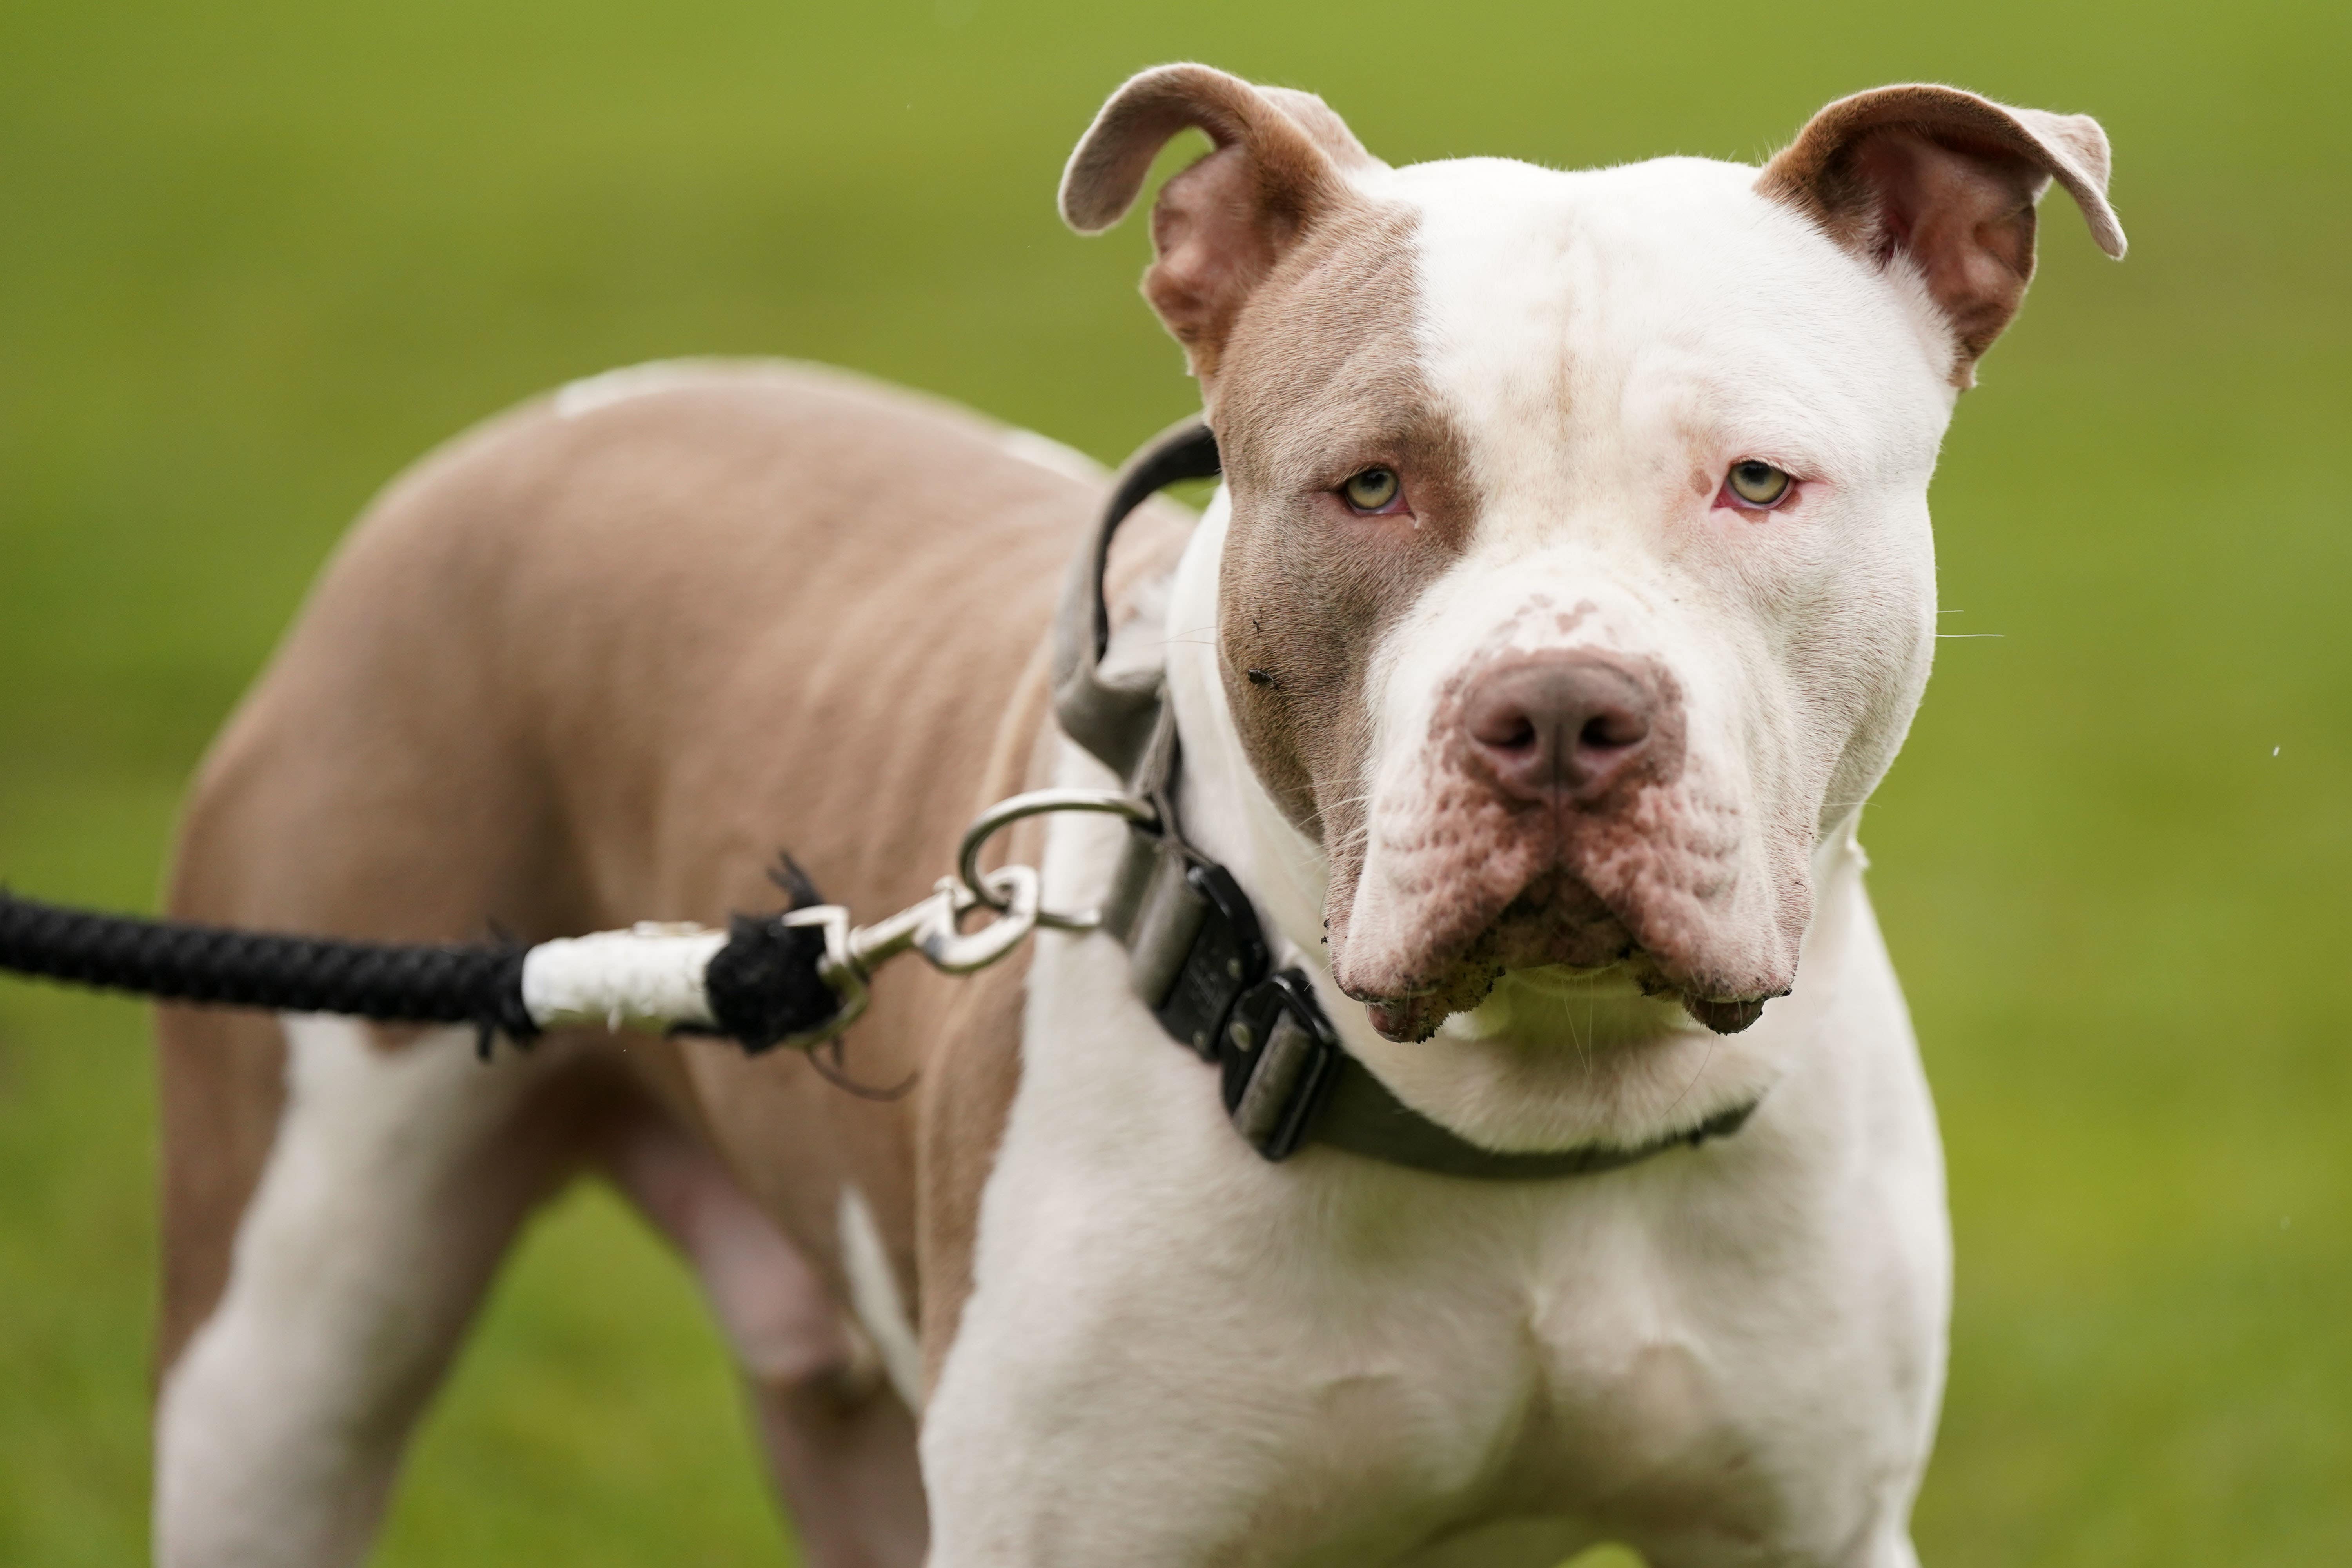 XL bully dog ban to begin on New Year's Eve | The Independent